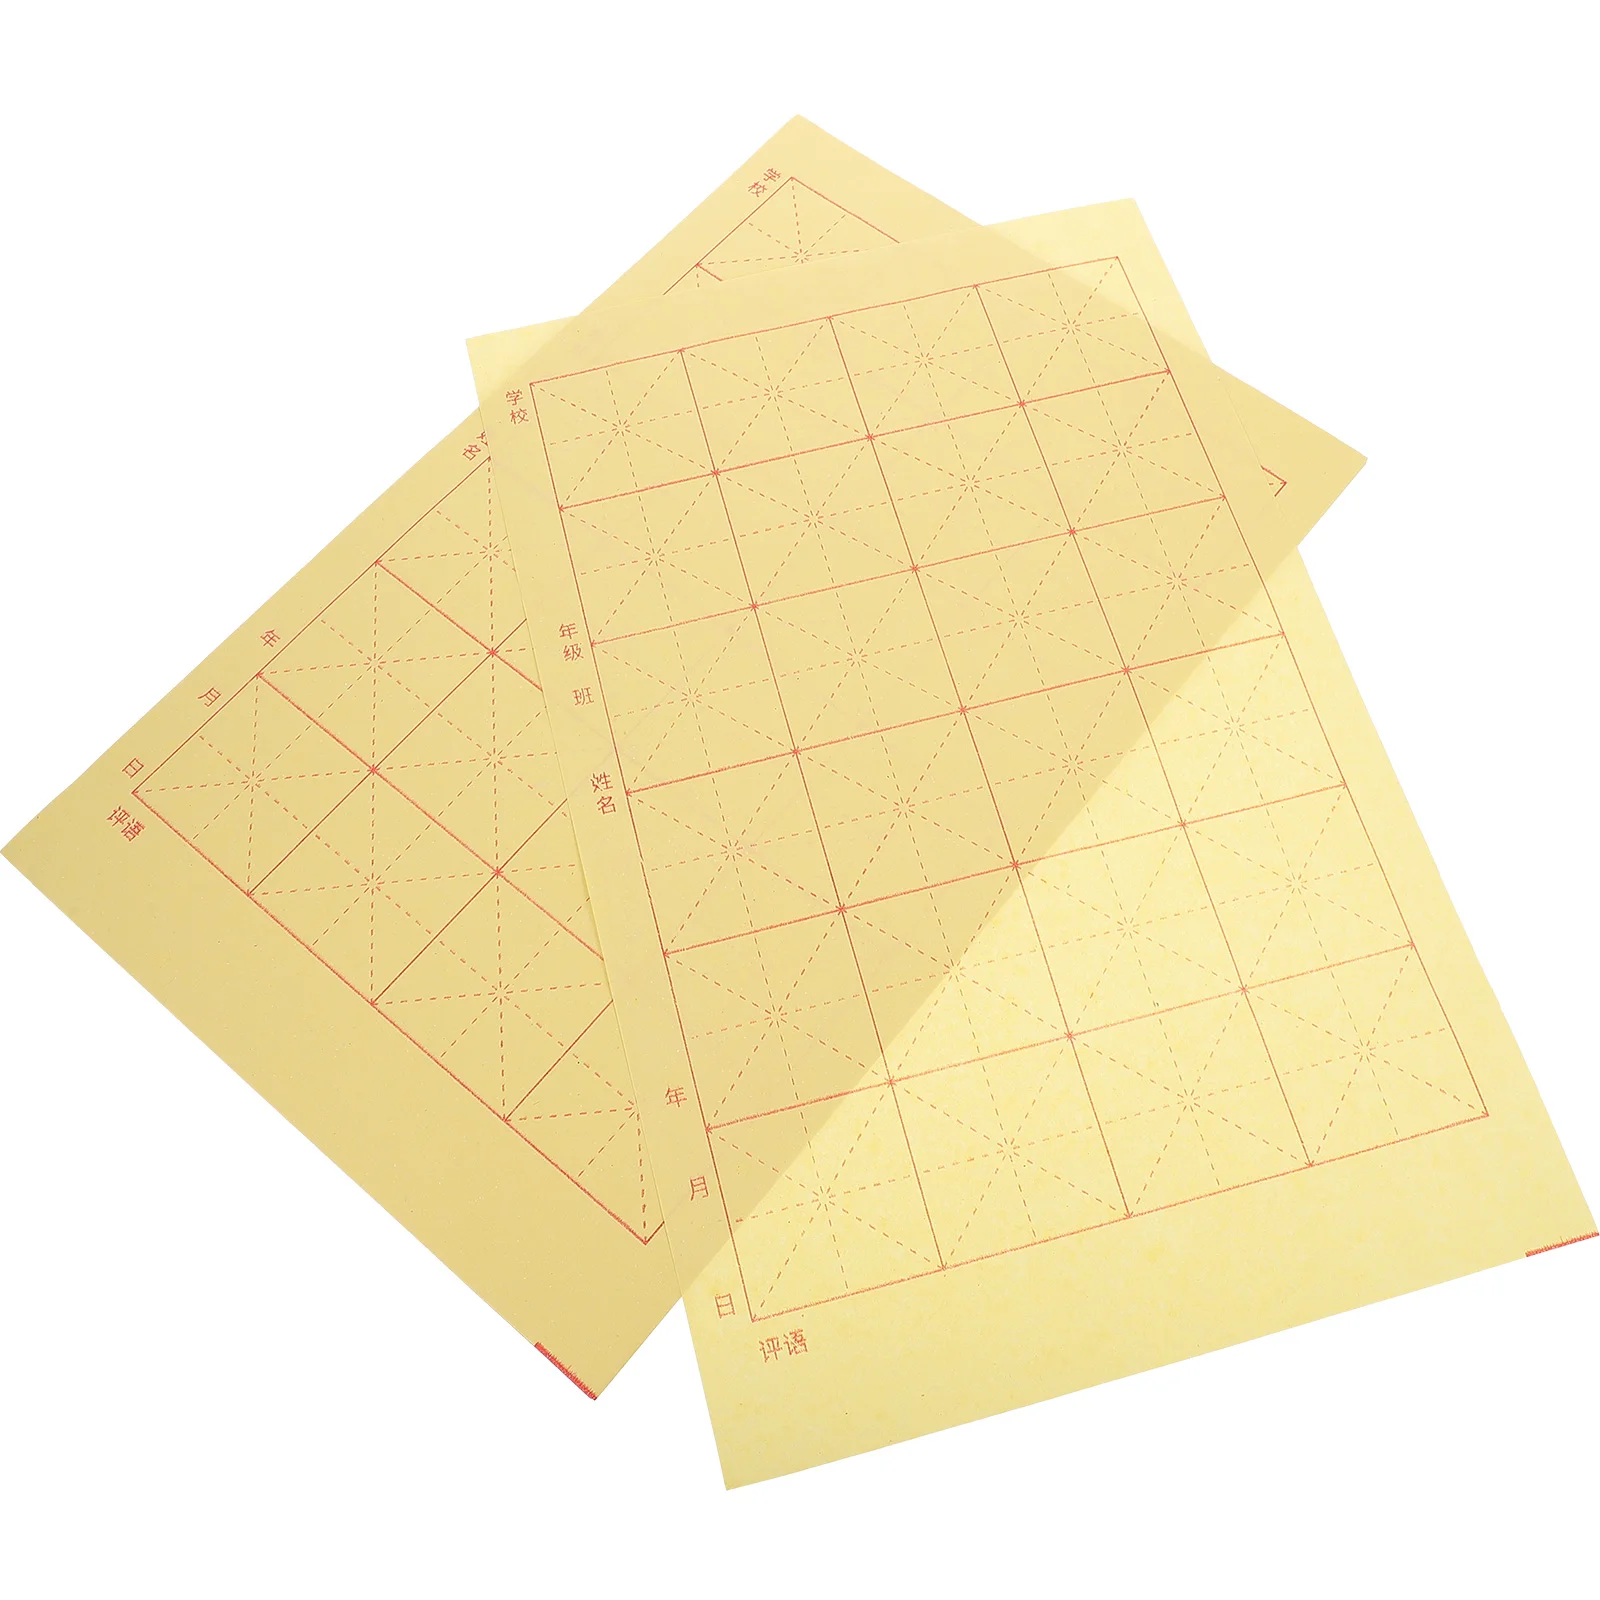 150 Sheets Chinese Calligraphy Paper Ink Writing Grid Rice Paper For Chinese Calligraphy Brush Writing Sumi Set